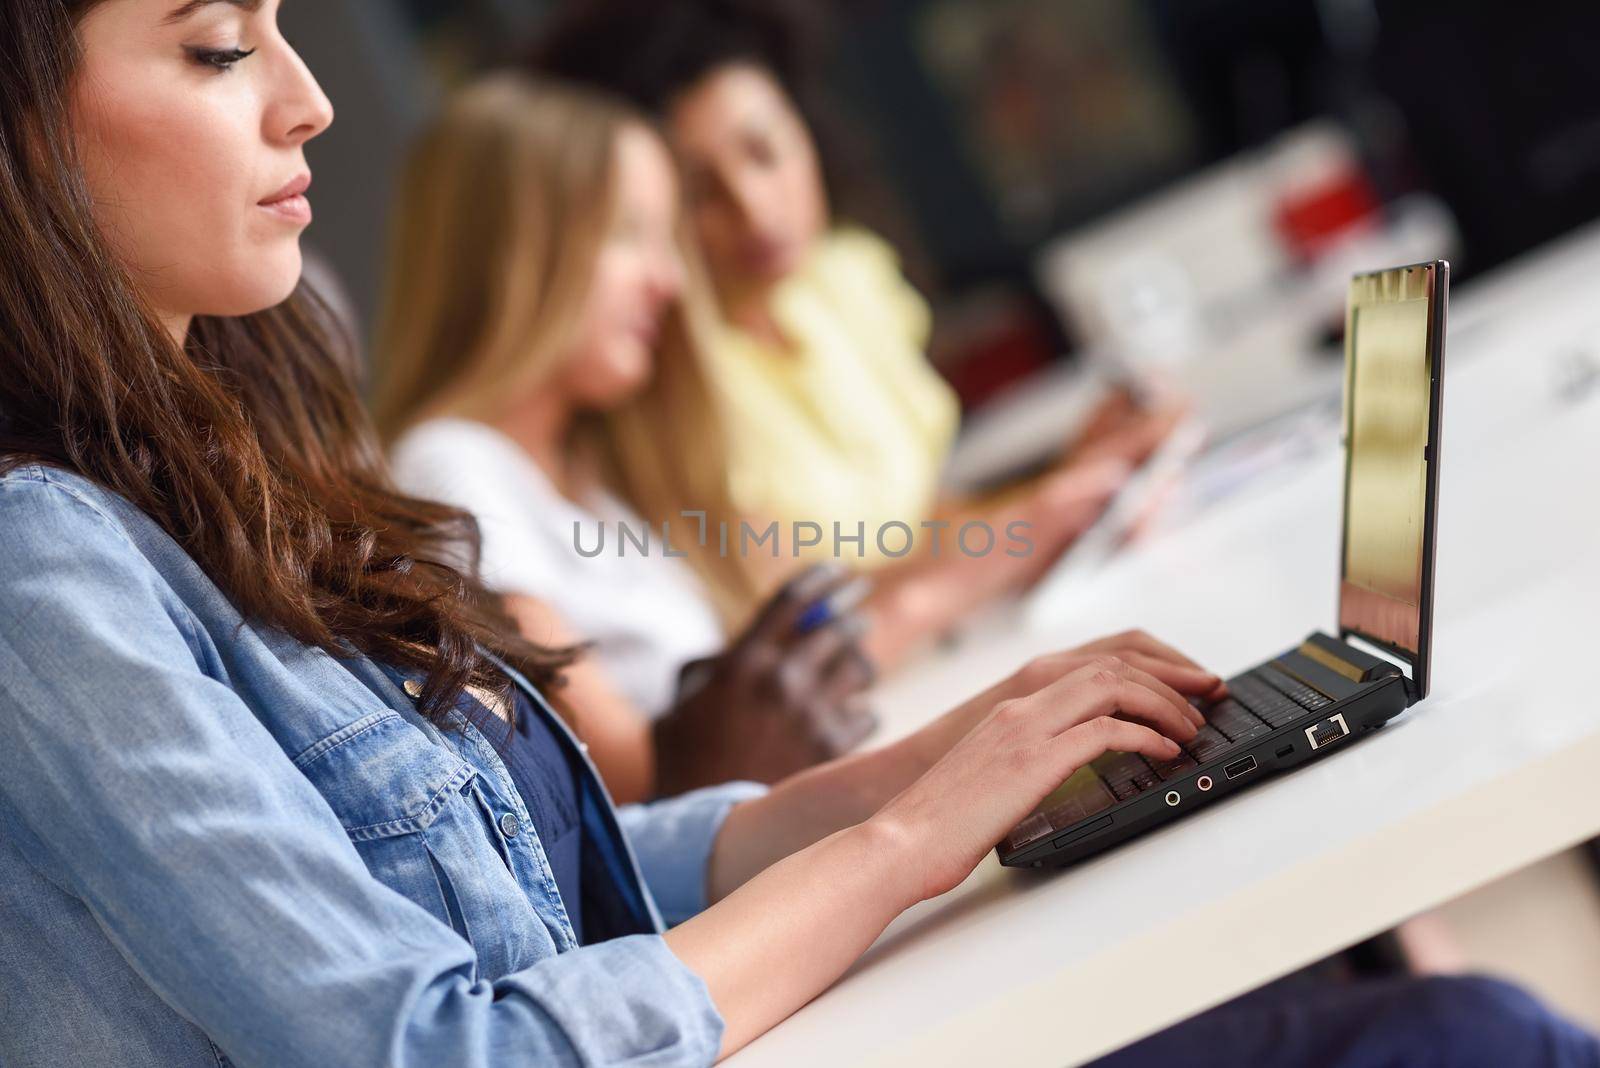 Young woman studying with laptop computer on white desk. Beautiful girls and guys working together wearing casual clothes. Multi-ethnic coworkers group.